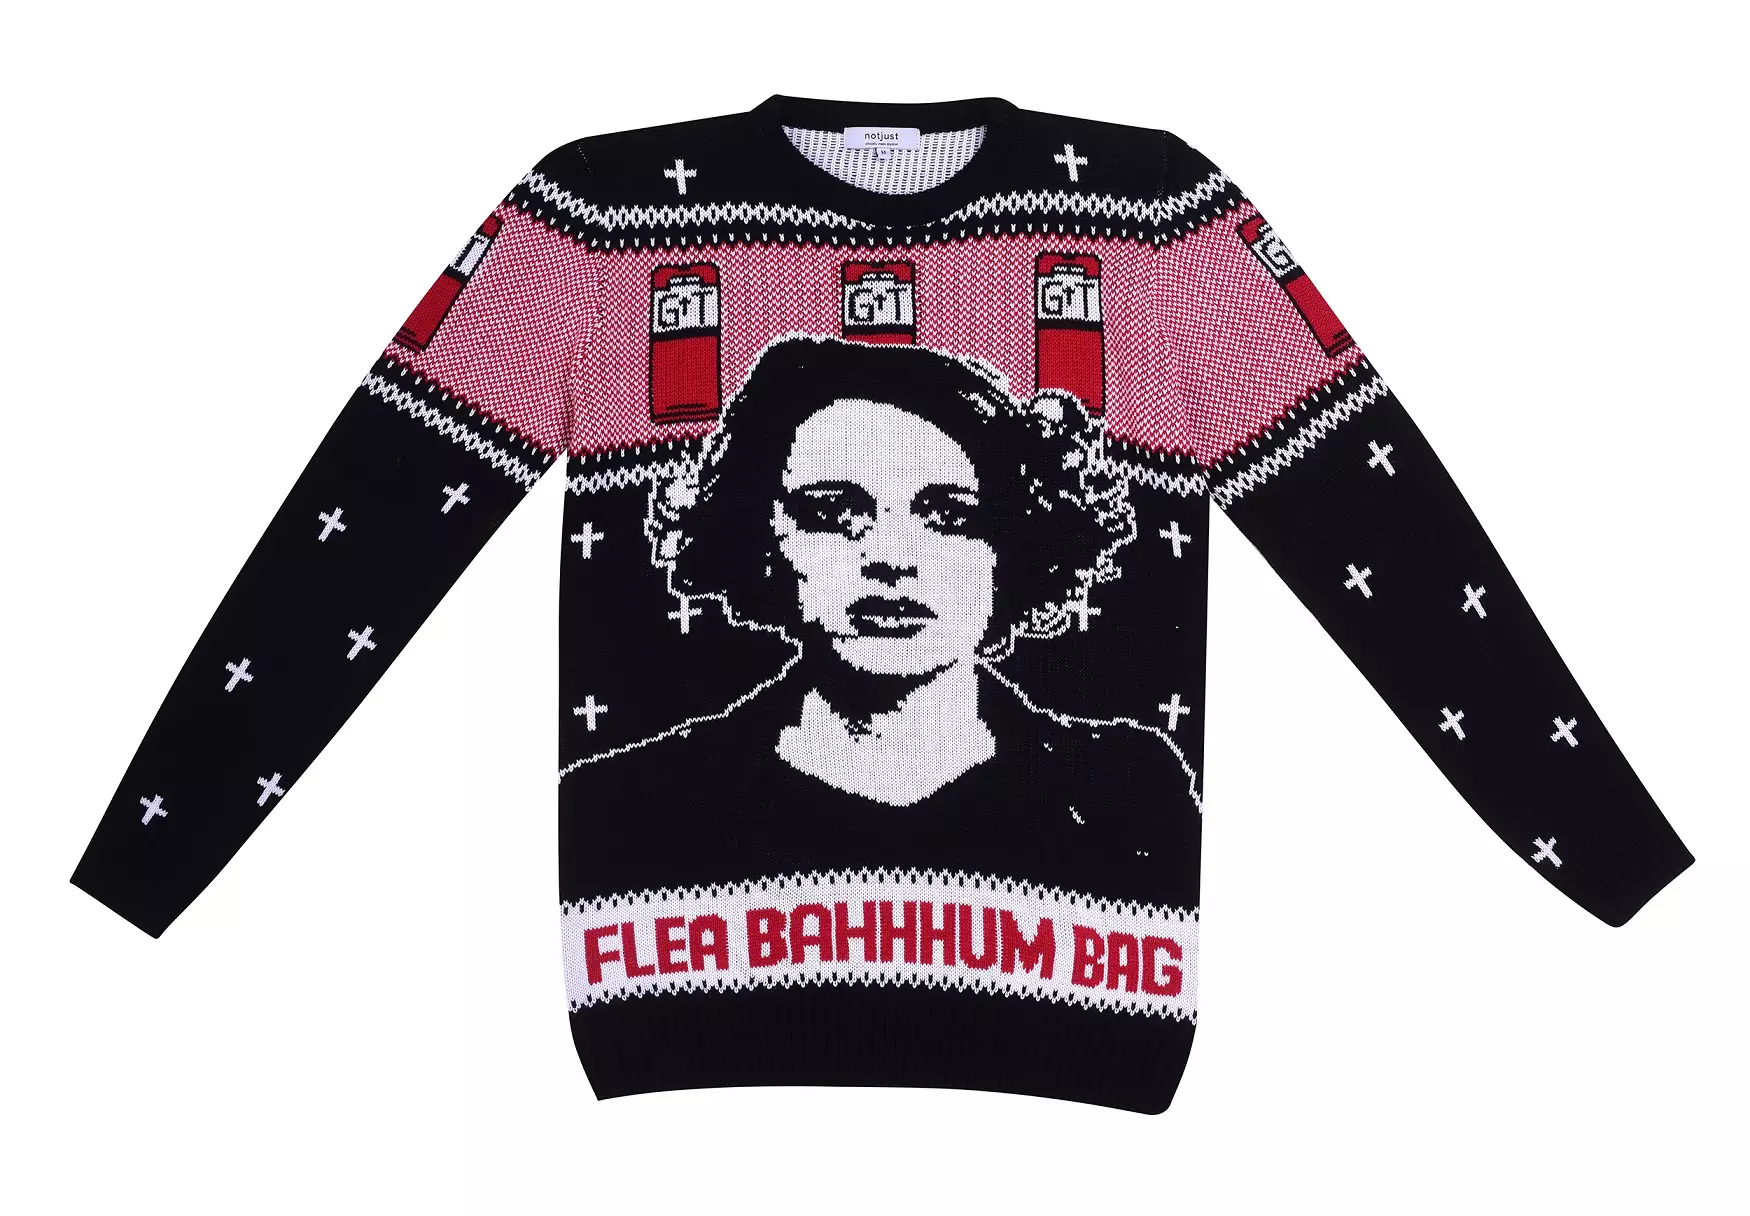 Fleabag features on one of the jumpers (